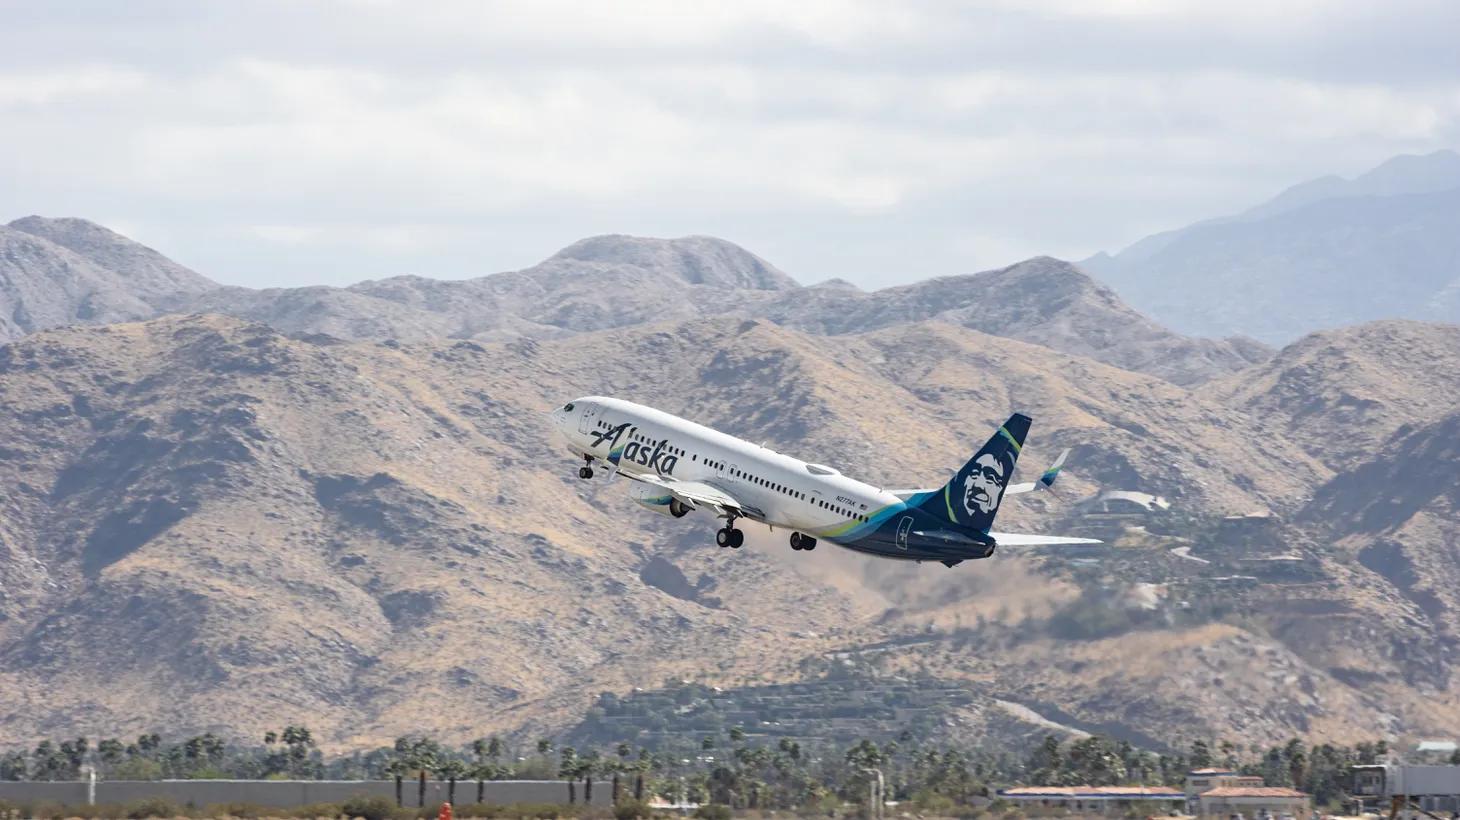 A jet takes off from Palm Springs International Airport, which has defied COVID-related slowdowns by increasing flights and passenger traffic during the pandemic.